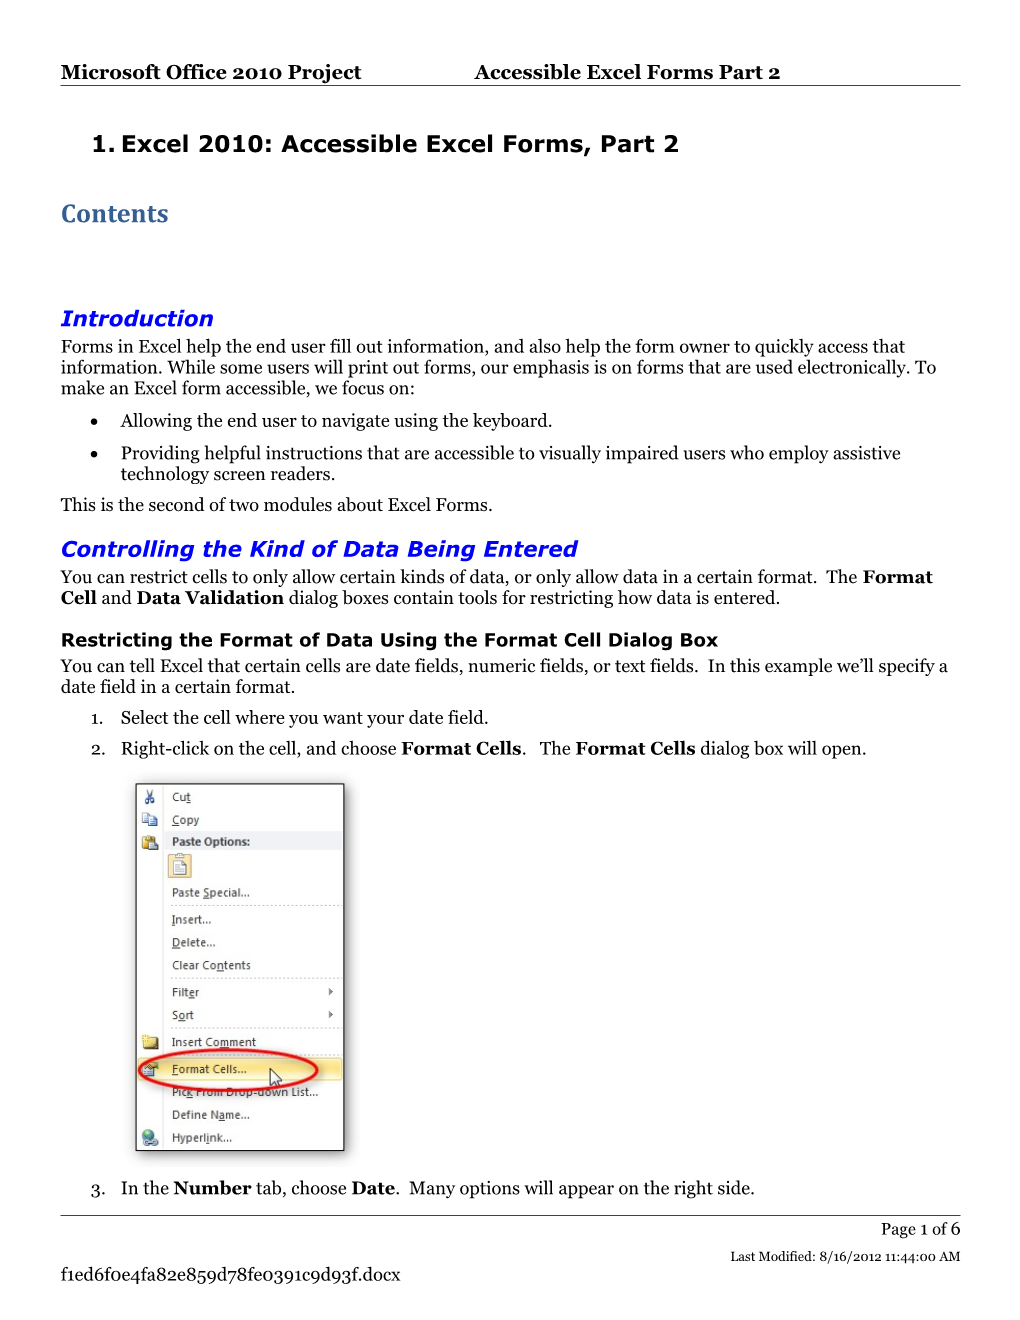 Excel 2010: Accessible Excel Forms, Part 2